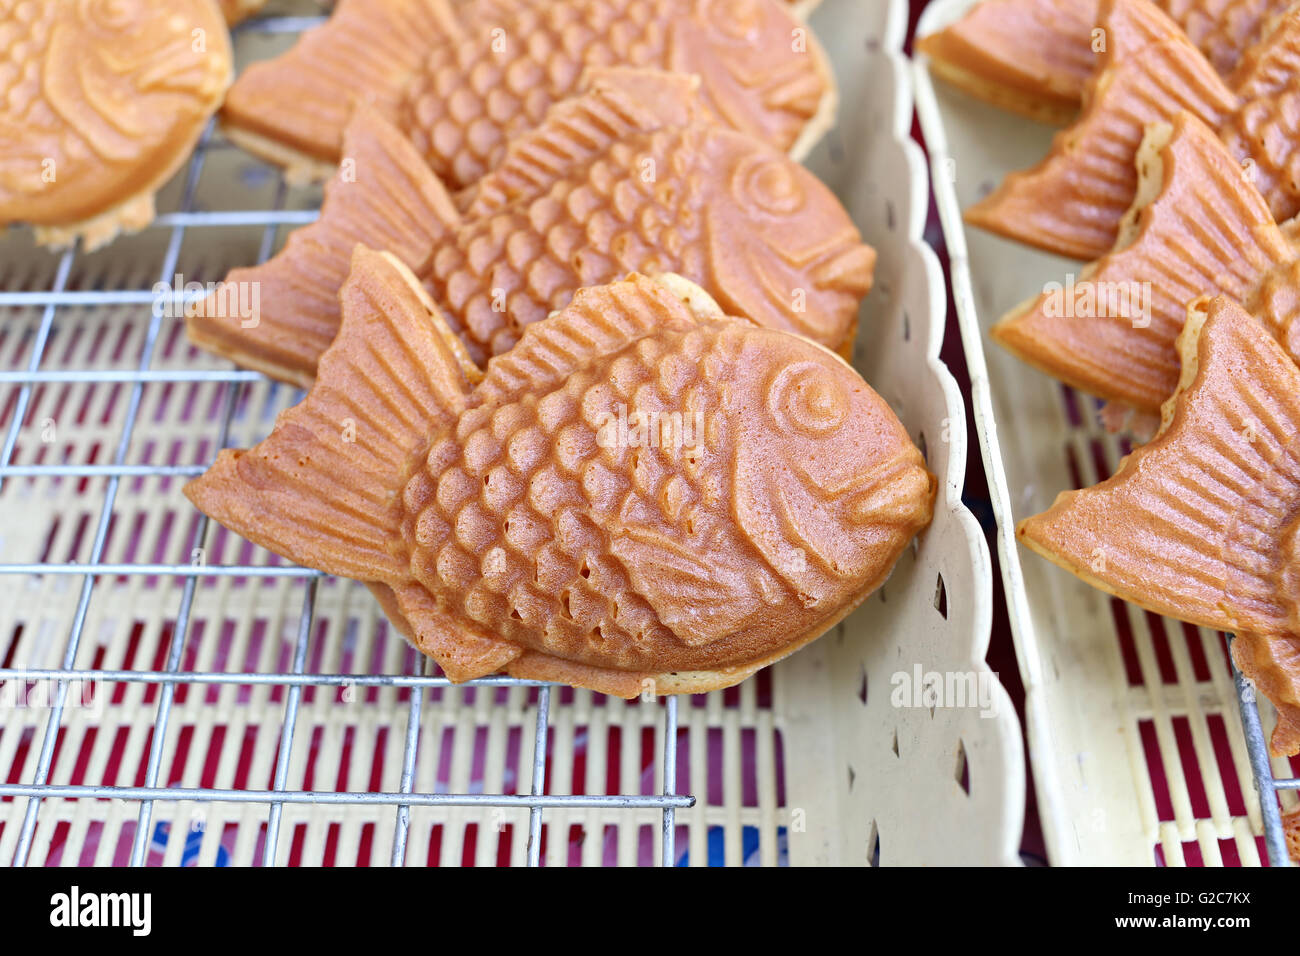 Sweet dessert with shape fish in the market. Stock Photo